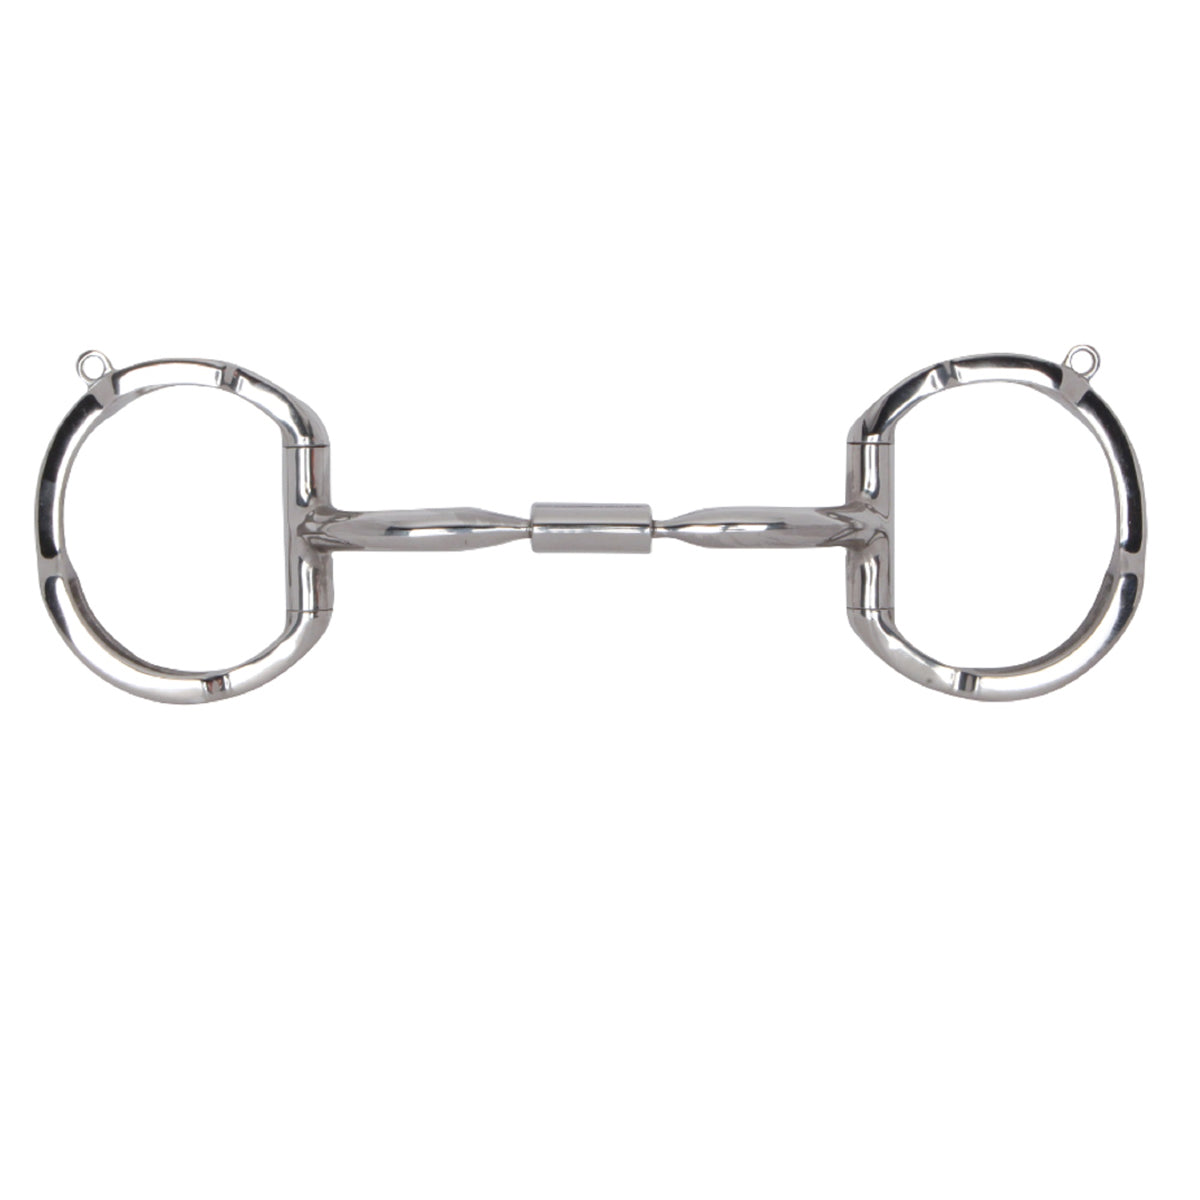 Myler Eggbutt with Hooks with Stainless Steel Comfort Snaffle Wide Barrel MB 02